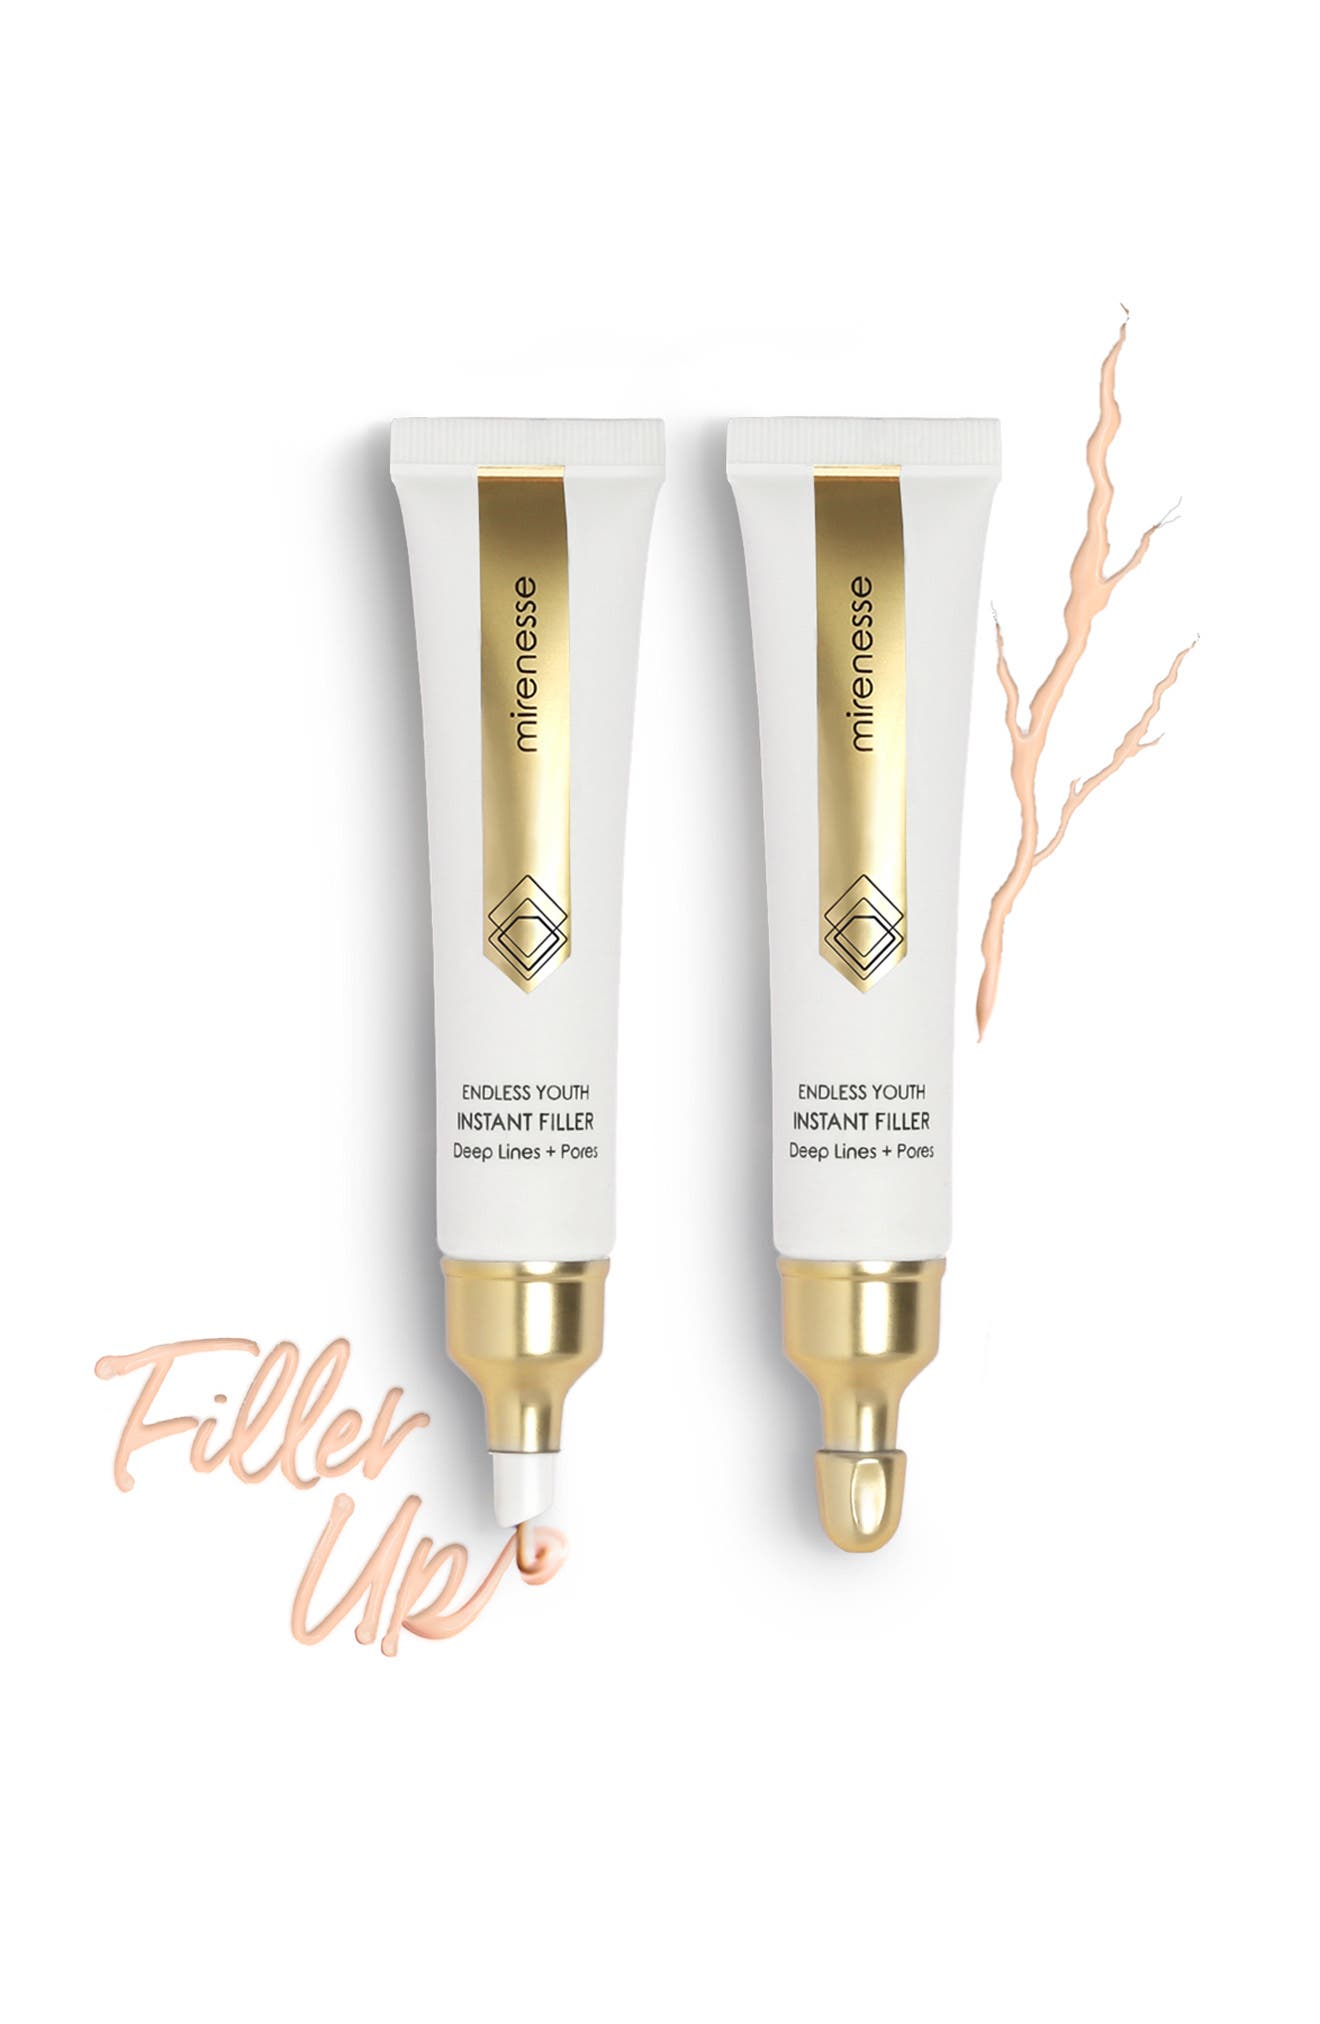 Endless Youth Instant Filler Duo Mirenesse